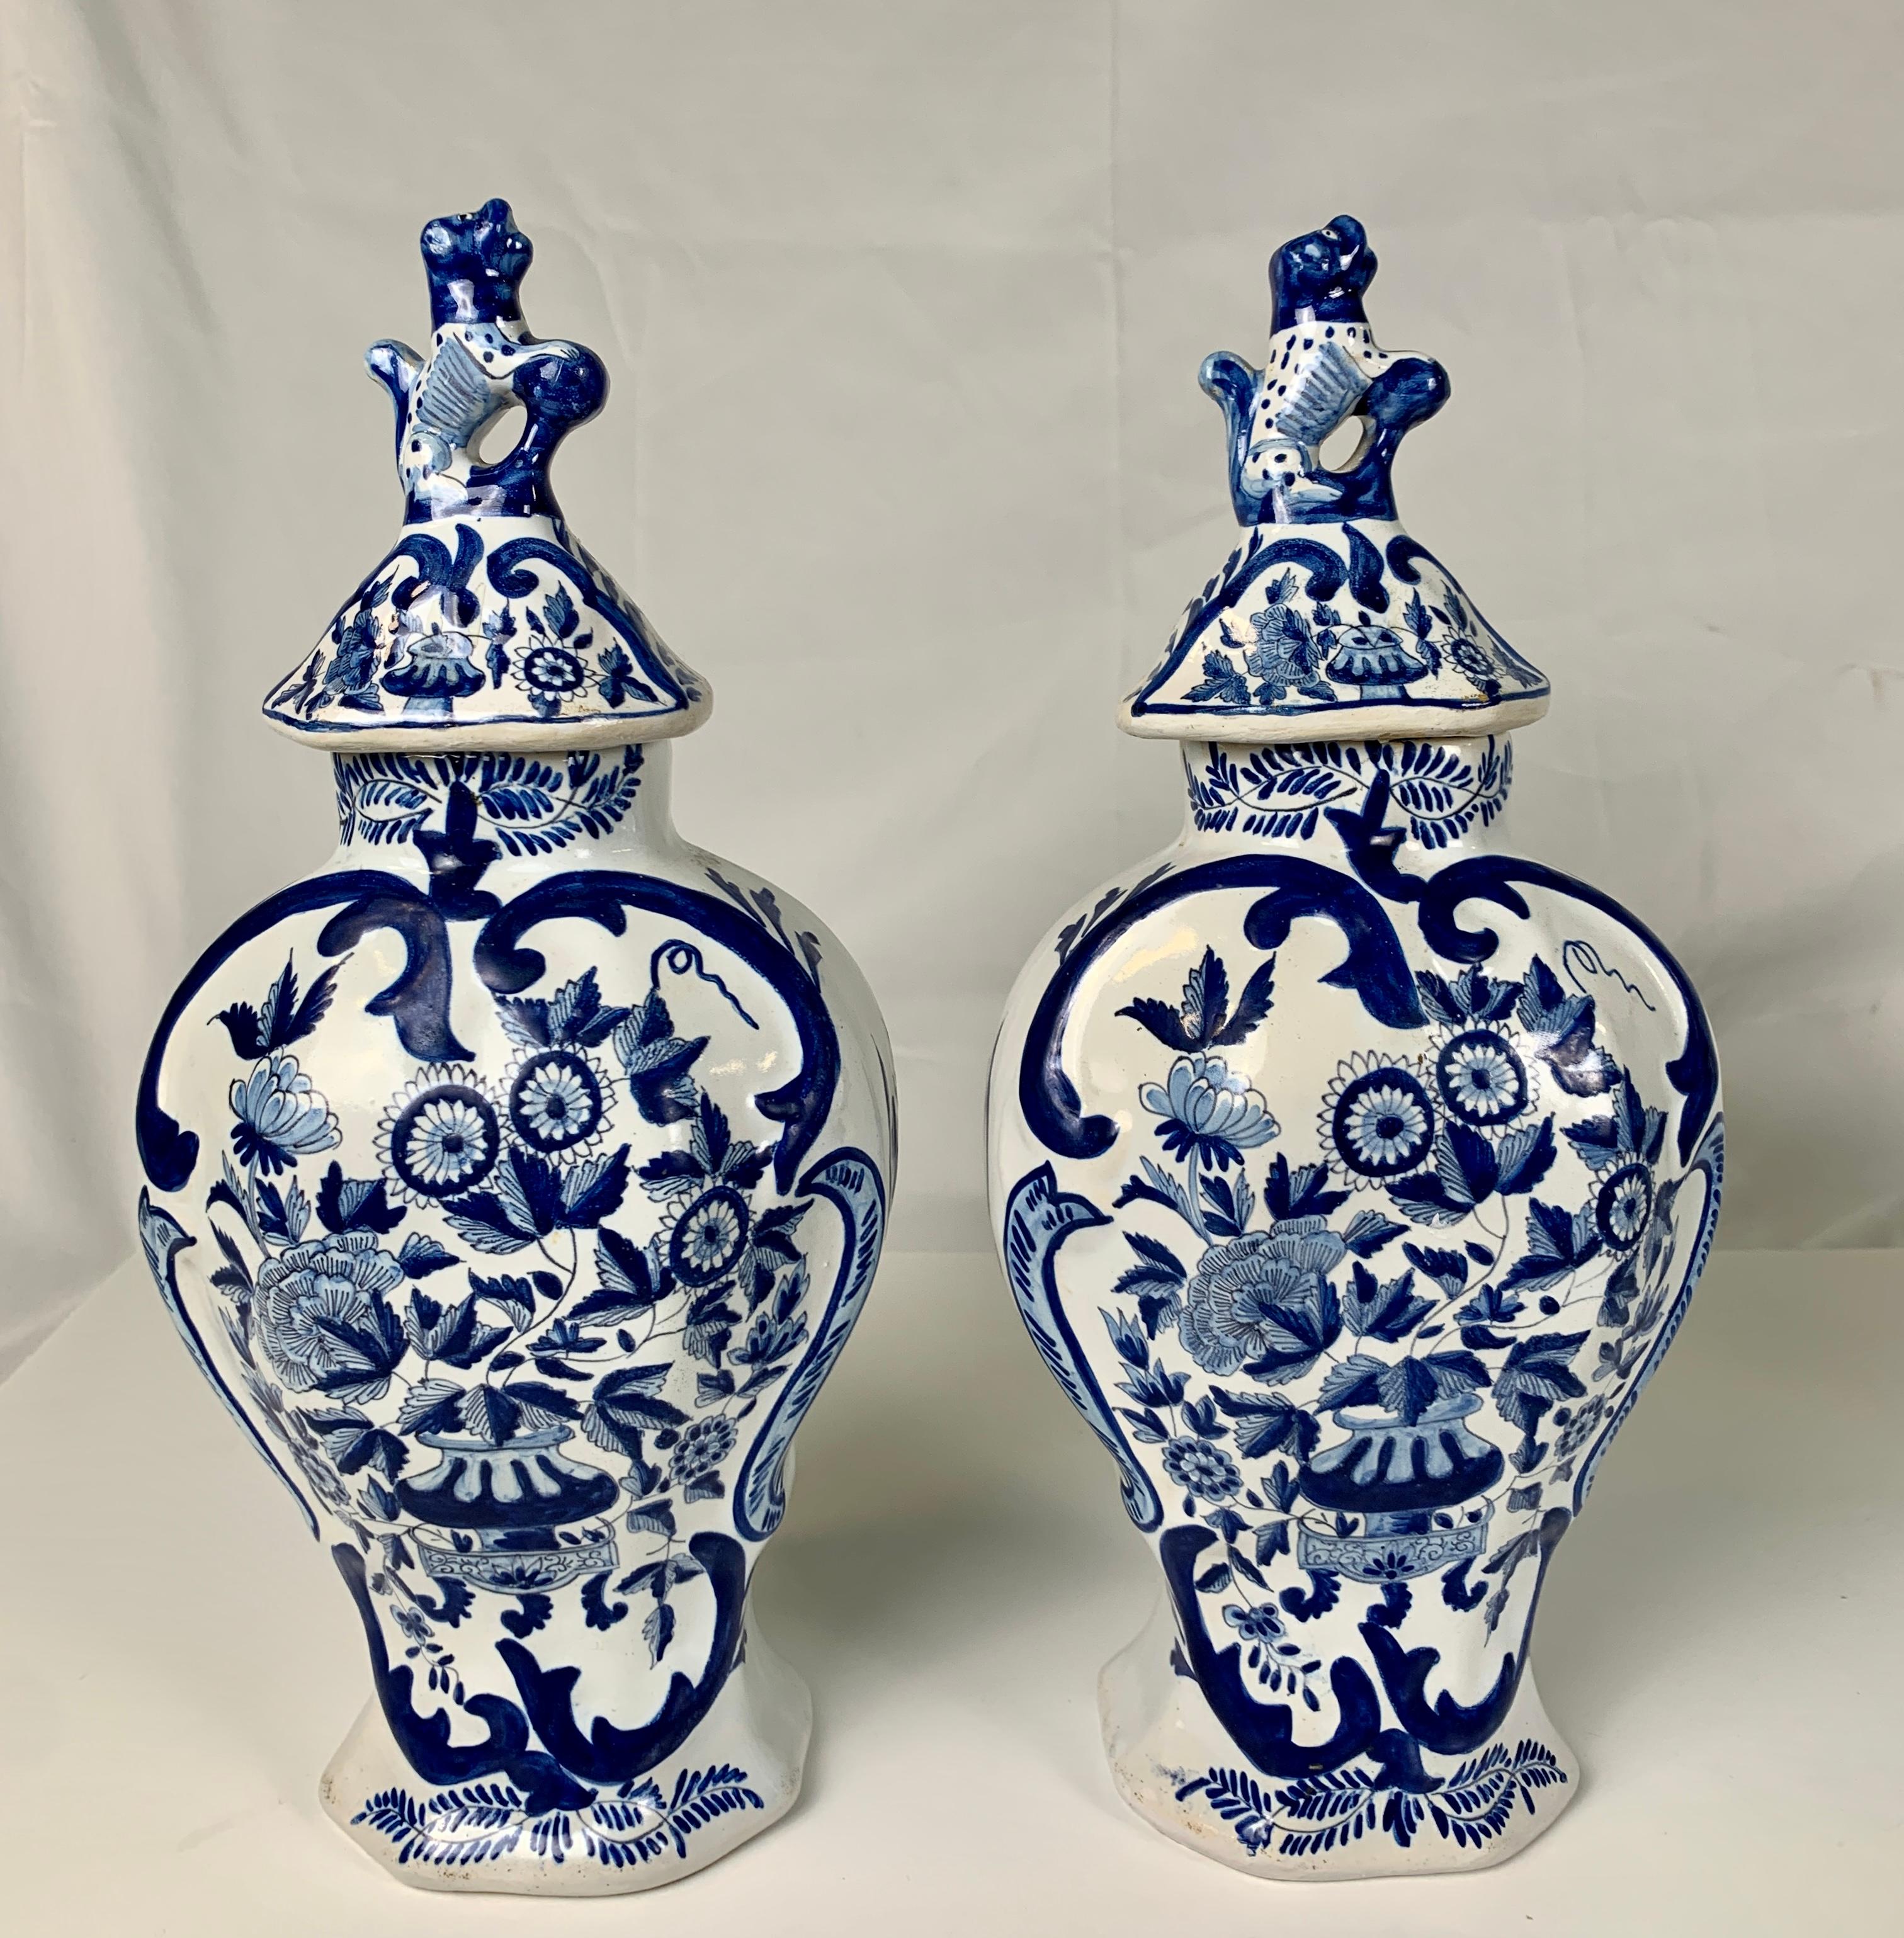 20th Century Group of Large Dutch Delft Jars and Vases 18th-19th and 20th Centuries